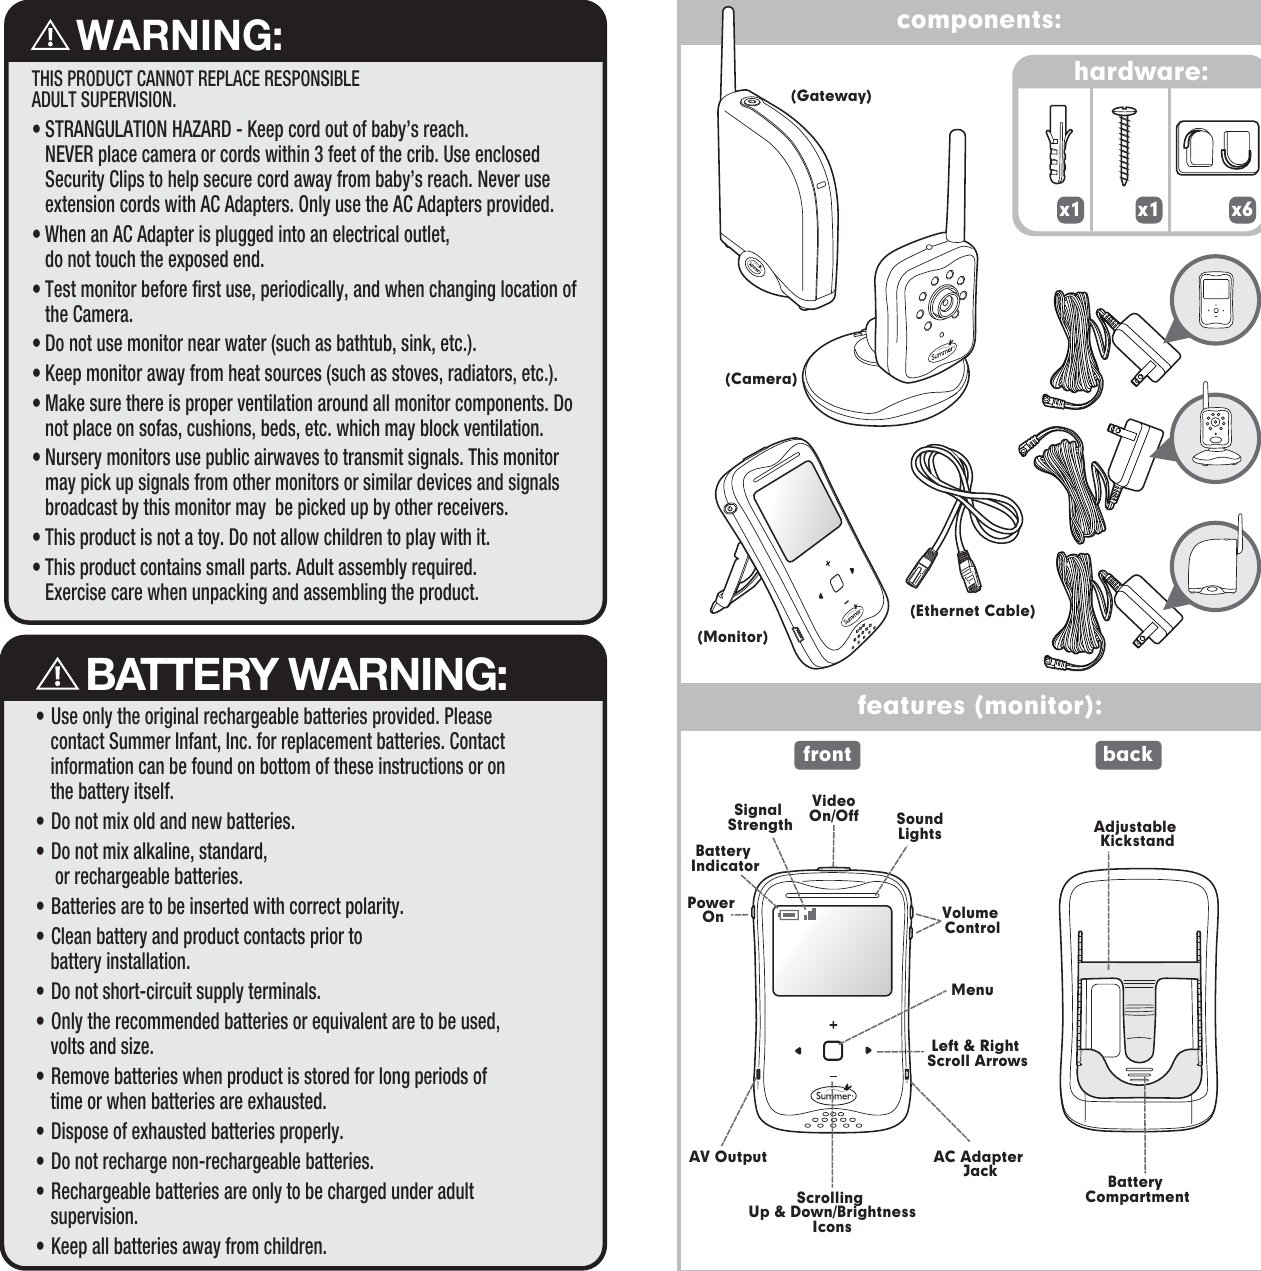 components:features (monitor):    BATTERY WARNING:• Use only the original rechargeable batteries provided. Please contact Summer Infant, Inc. for replacement batteries. Contact information can be found on bottom of these instructions or on the battery itself.• Do not mix old and new batteries.• Do not mix alkaline, standard, or rechargeable batteries.• Batteries are to be inserted with correct polarity.• Clean battery and product contacts prior to battery installation.• Do not short-circuit supply terminals.• Only the recommended batteries or equivalent are to be used, volts and size.• Remove batteries when product is stored for long periods of time or when batteries are exhausted.• Dispose of exhausted batteries properly.• Do not recharge non-rechargeable batteries.• Rechargeable batteries are only to be charged under adult supervision.• Keep all batteries away from children.    WARNING:THIS PRODUCT CANNOT REPLACE RESPONSIBLEADULT SUPERVISION.• STRANGULATION HAZARD - Keep cord out of baby’s reach. NEVER place camera or cords within 3 feet of the crib. Use enclosed Security Clips to help secure cord away from baby’s reach. Never use extension cords with AC Adapters. Only use the AC Adapters provided.• When an AC Adapter is plugged into an electrical outlet, do not touch the exposed end.• Test monitor before first use, periodically, and when changing location of the Camera.• Do not use monitor near water (such as bathtub, sink, etc.).• Keep monitor away from heat sources (such as stoves, radiators, etc.). • Make sure there is proper ventilation around all monitor components. Do not place on sofas, cushions, beds, etc. which may block ventilation.• Nursery monitors use public airwaves to transmit signals. This monitor may pick up signals from other monitors or similar devices and signals broadcast by this monitor may  be picked up by other receivers. • This product is not a toy. Do not allow children to play with it.• This product contains small parts. Adult assembly required. Exercise care when unpacking and assembling the product. hardware: x6 x1 x1 VideoOn/OffMenuBattery IndicatorPower On Volume ControlAV OutputScrolling Up &amp; Down/BrightnessIconsLeft &amp; Right Scroll ArrowsSoundLightsSignal StrengthBattery CompartmentAdjustable KickstandAC Adapter Jackfront back(Gateway)(Camera)(Ethernet Cable)(Monitor)